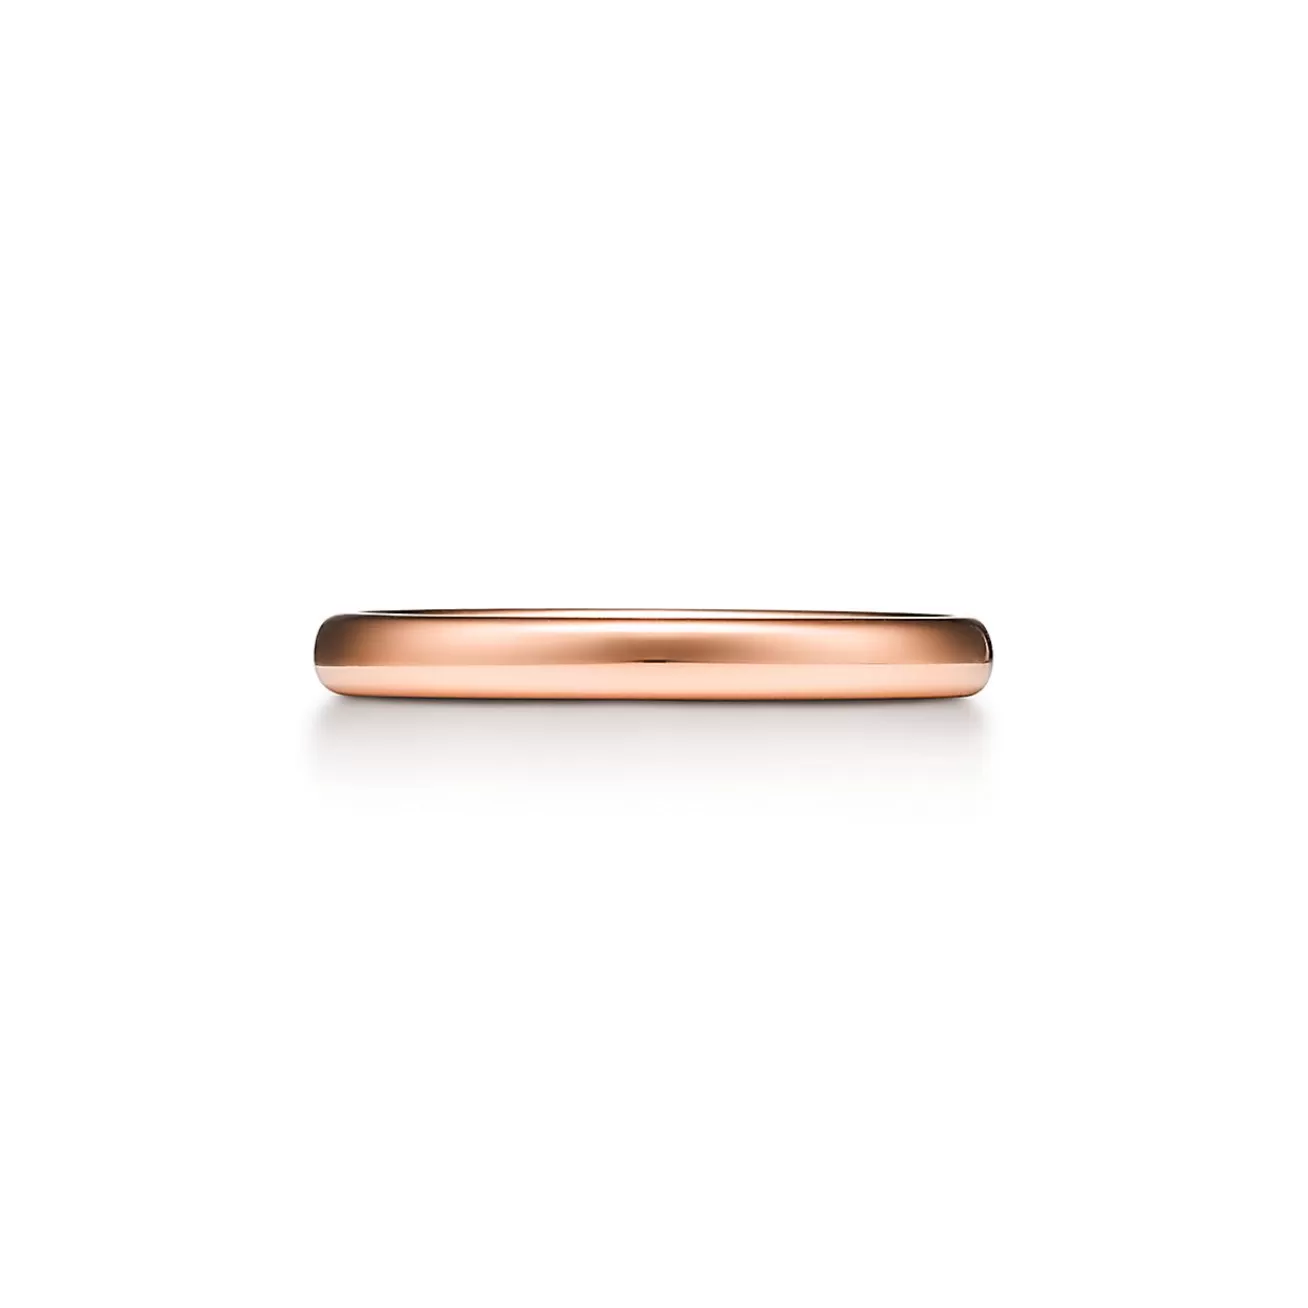 Tiffany & Co. Tiffany Forever Wedding Band Ring in Rose Gold, 2.5 mm Wide | ^Women Rings | Rose Gold Jewelry